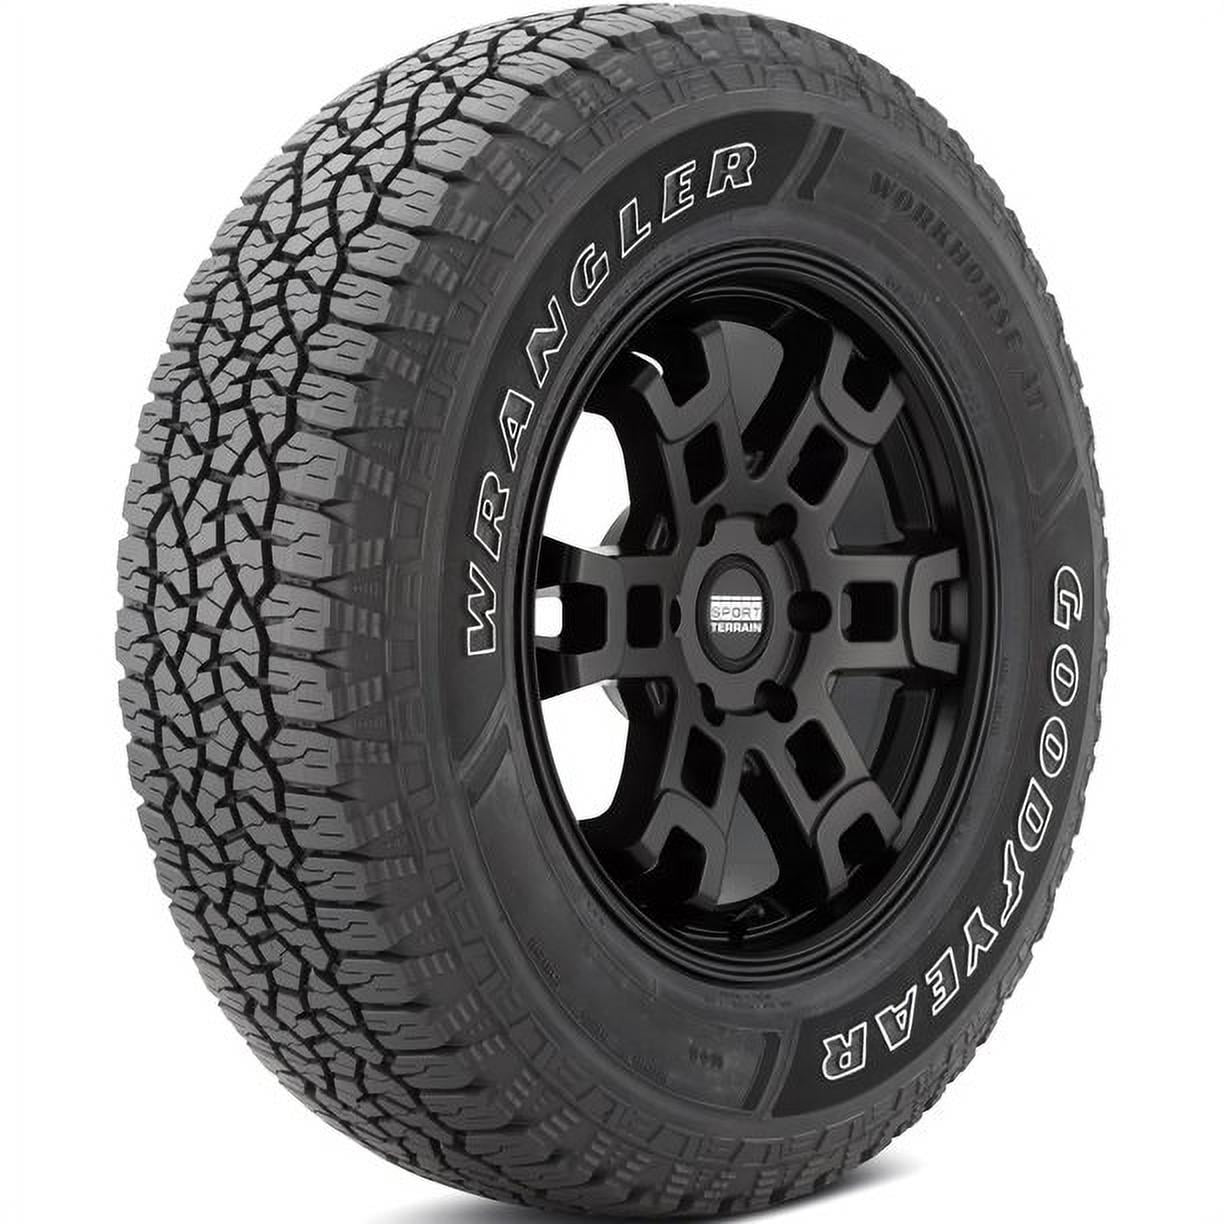 Goodyear Wrangler Workhorse AT 225/75-16 115 R Tire 